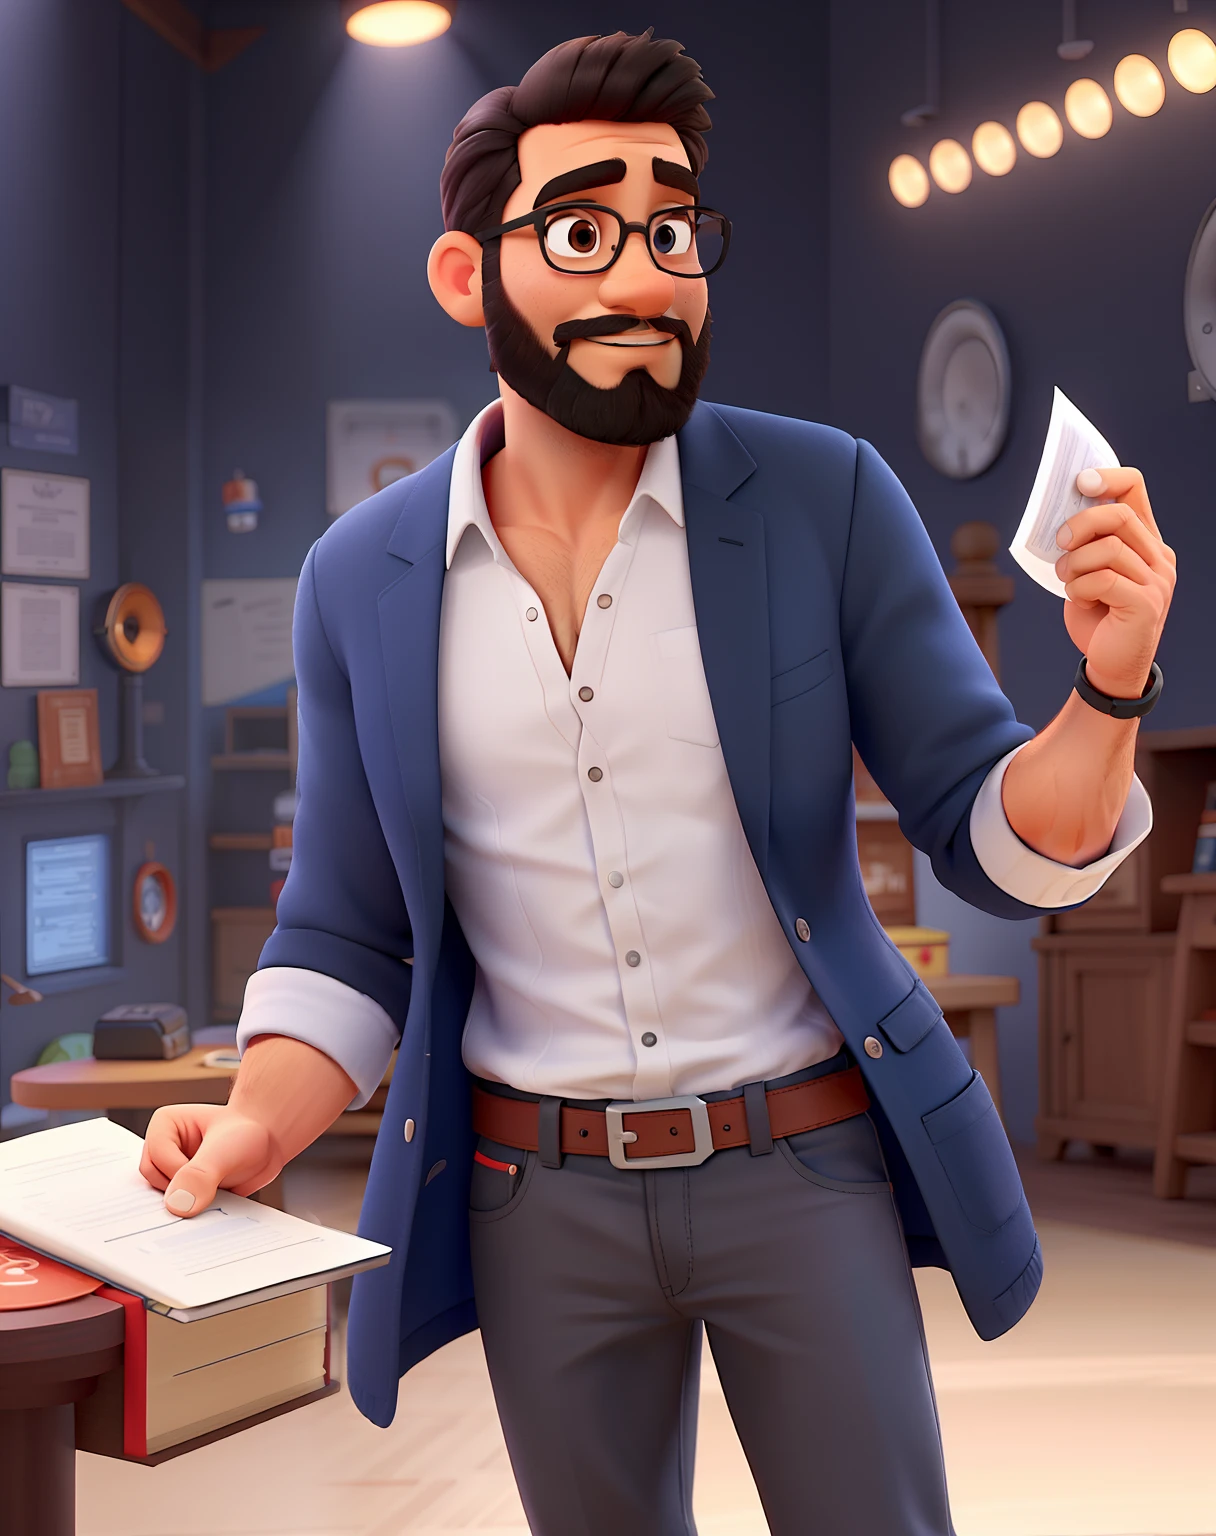 Pode melhorar barba mais rala com uns fios brancos, Make Full Body That Appear White Redley Shoes. Man stands black background on a speaker-type stage with microphone in one hand and book in the other in Disney pixar style best quality, maior qualidade.